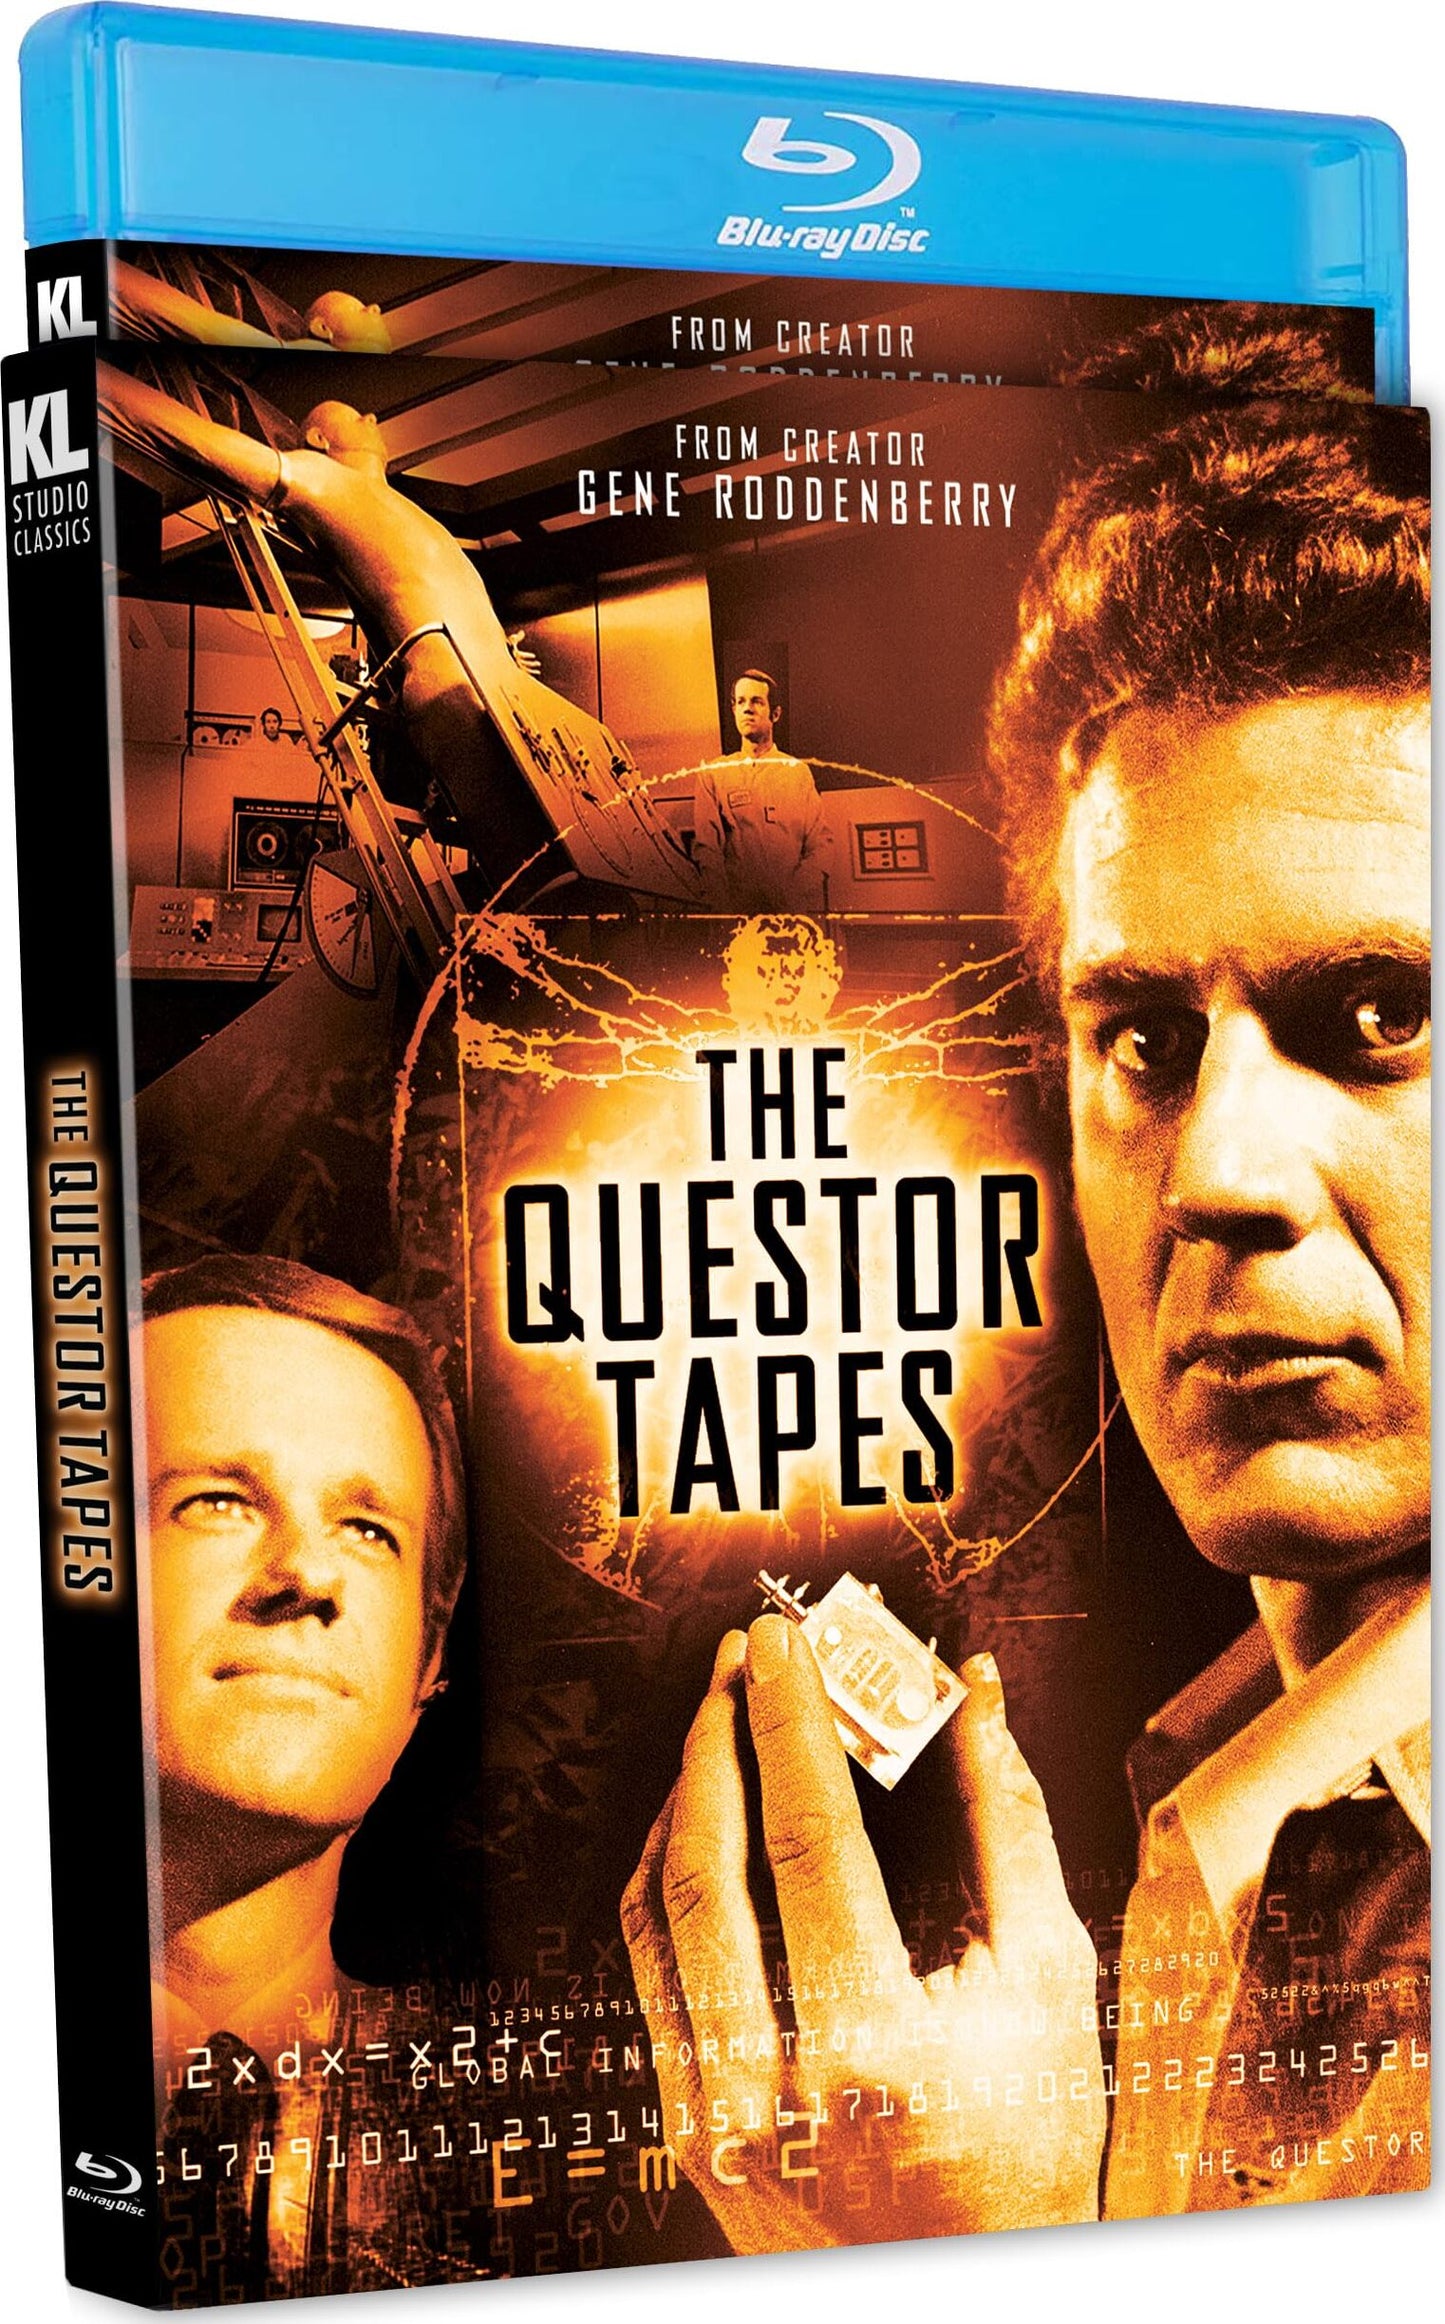 The Questor Tapes